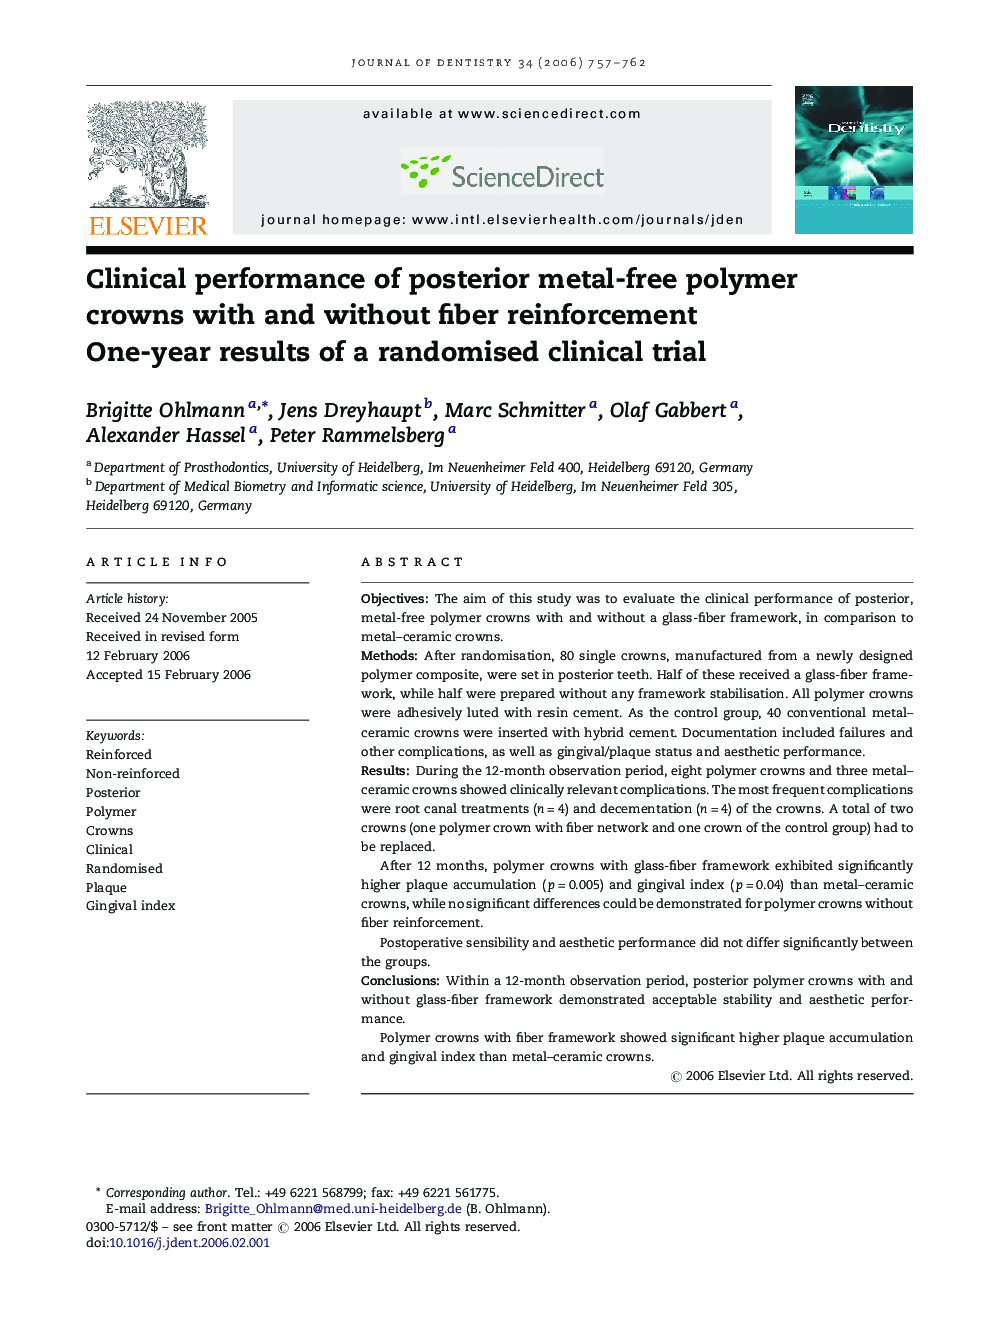 Clinical performance of posterior metal-free polymer crowns with and without fiber reinforcement: One-year results of a randomised clinical trial